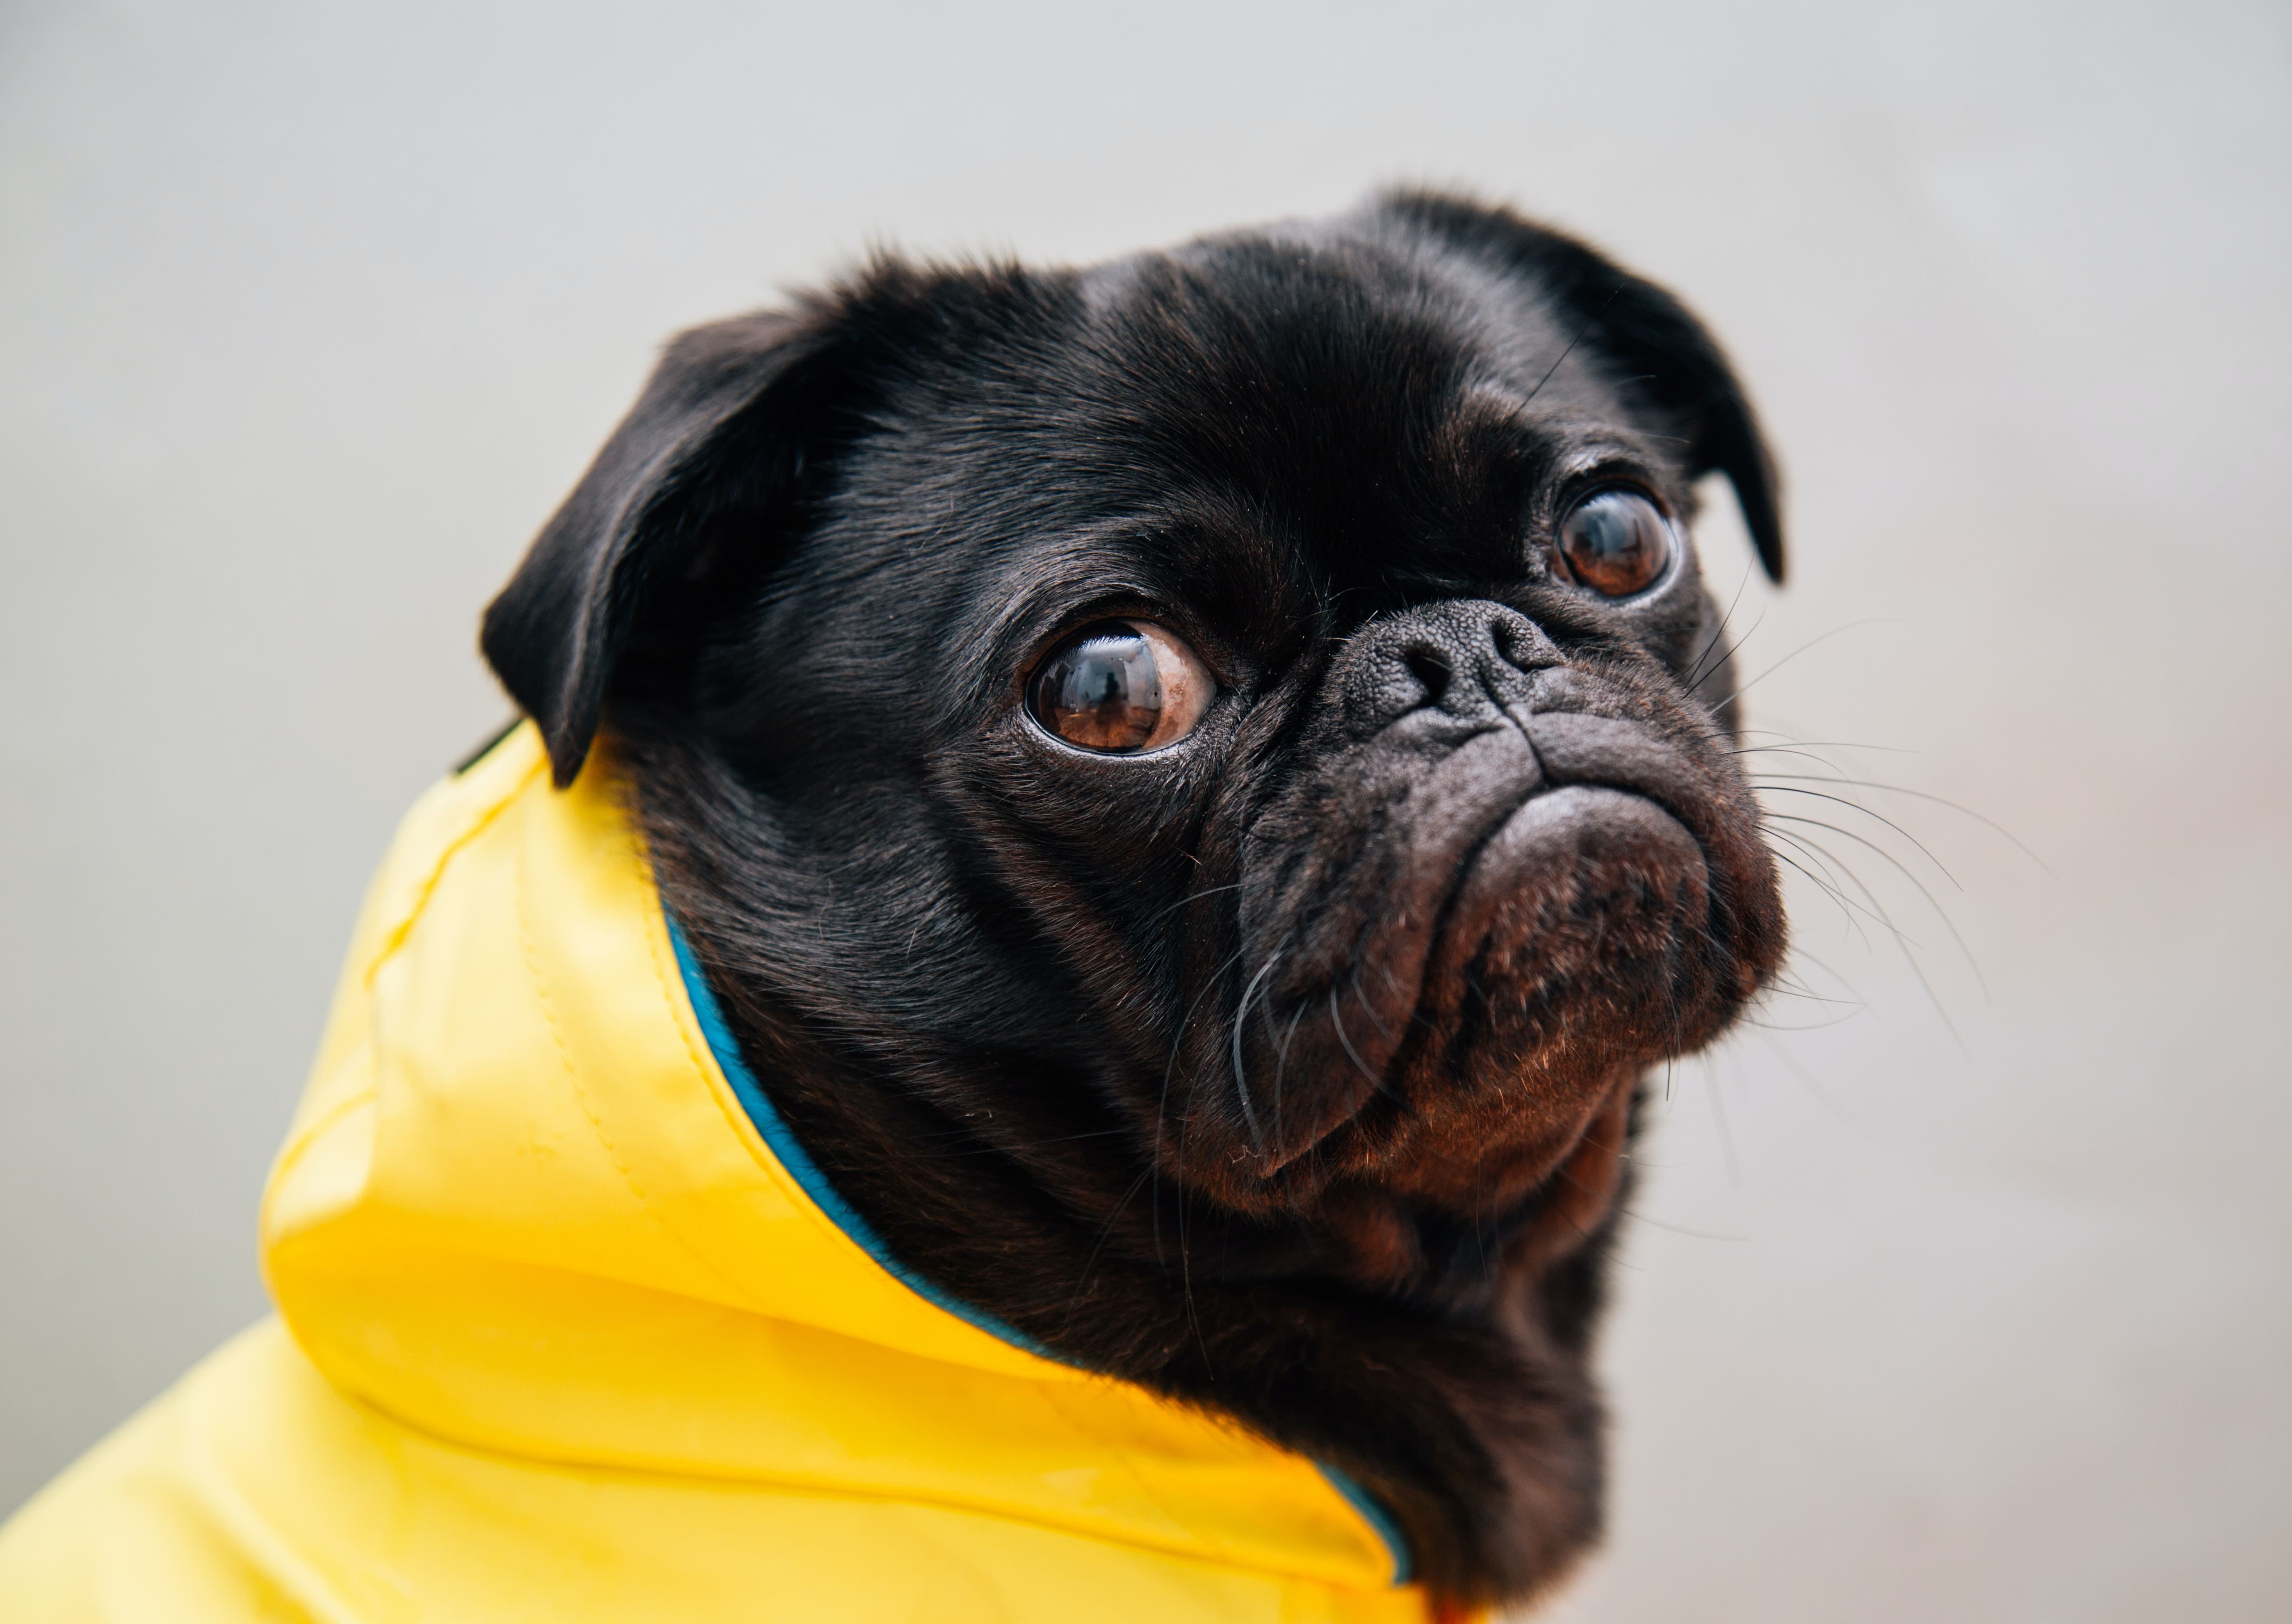 A black pug turning in a yellow raincoat